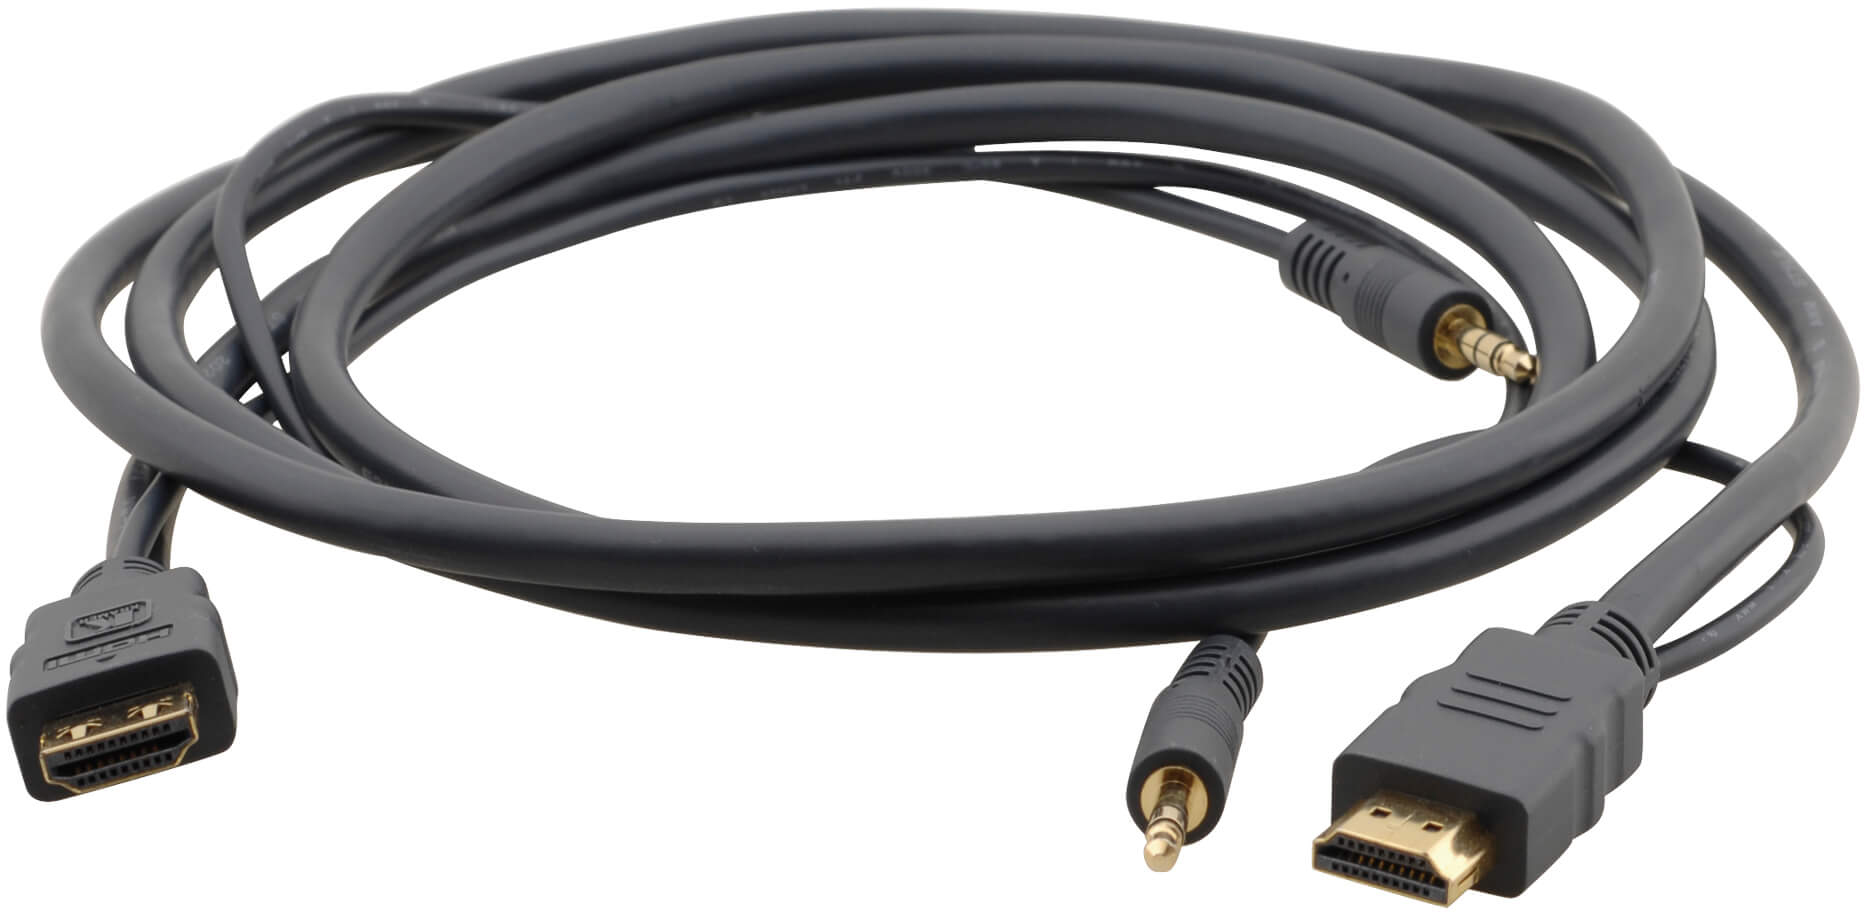 You Recently Viewed Kramer High–Speed HDMI Flexible Cable w/ Ethernet and 3.5mm Stereo Audio Image